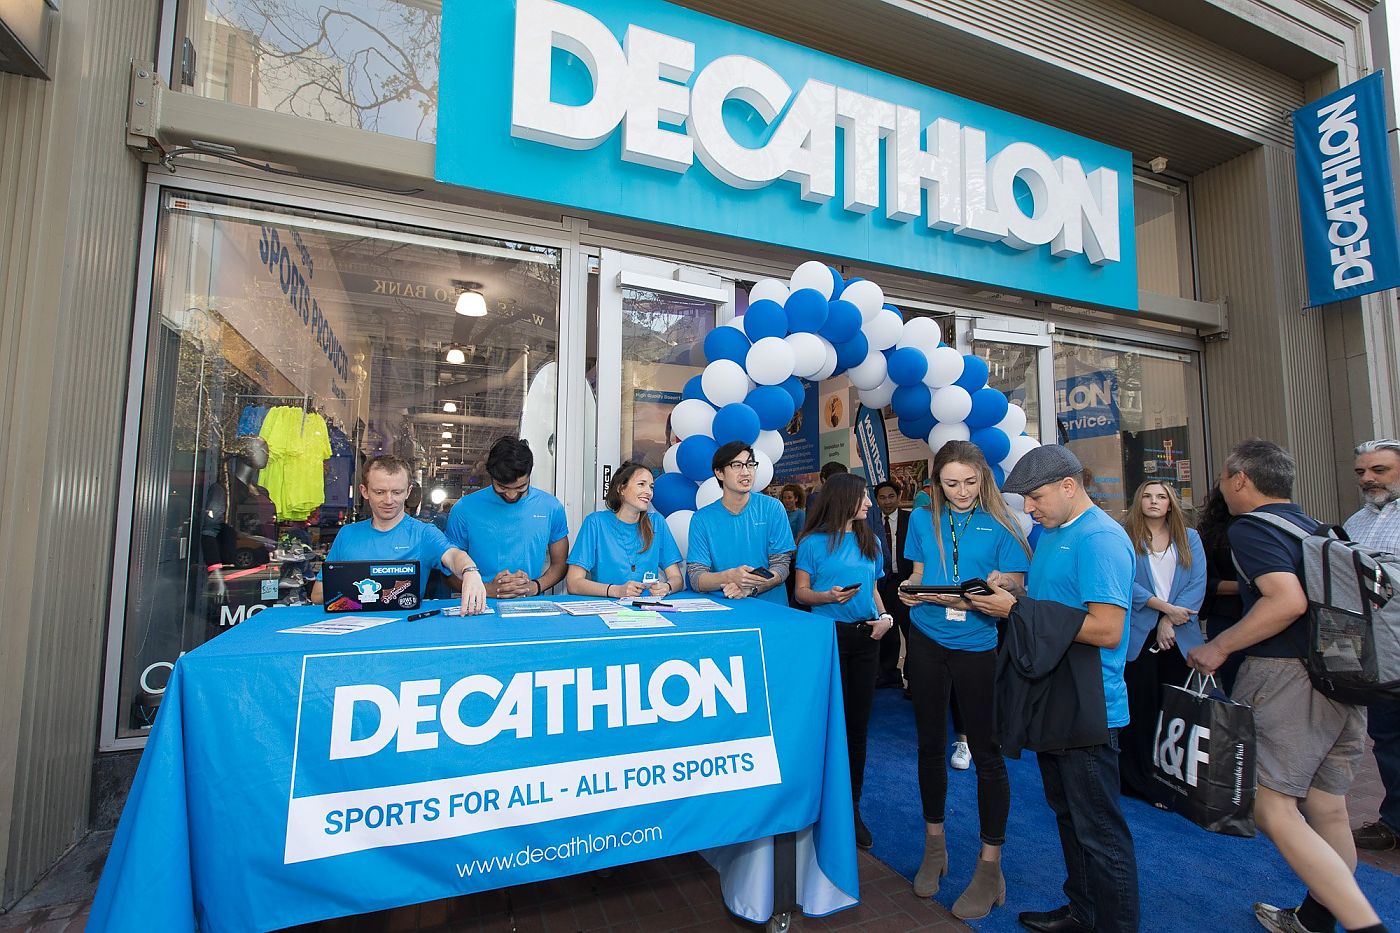 Decathlon America on X: BIG NEWS! Next spring, we are opening our first  full-size Decathlon store in the USA: in Emeryville, CA! After 42 years  around the world, we're excited to be